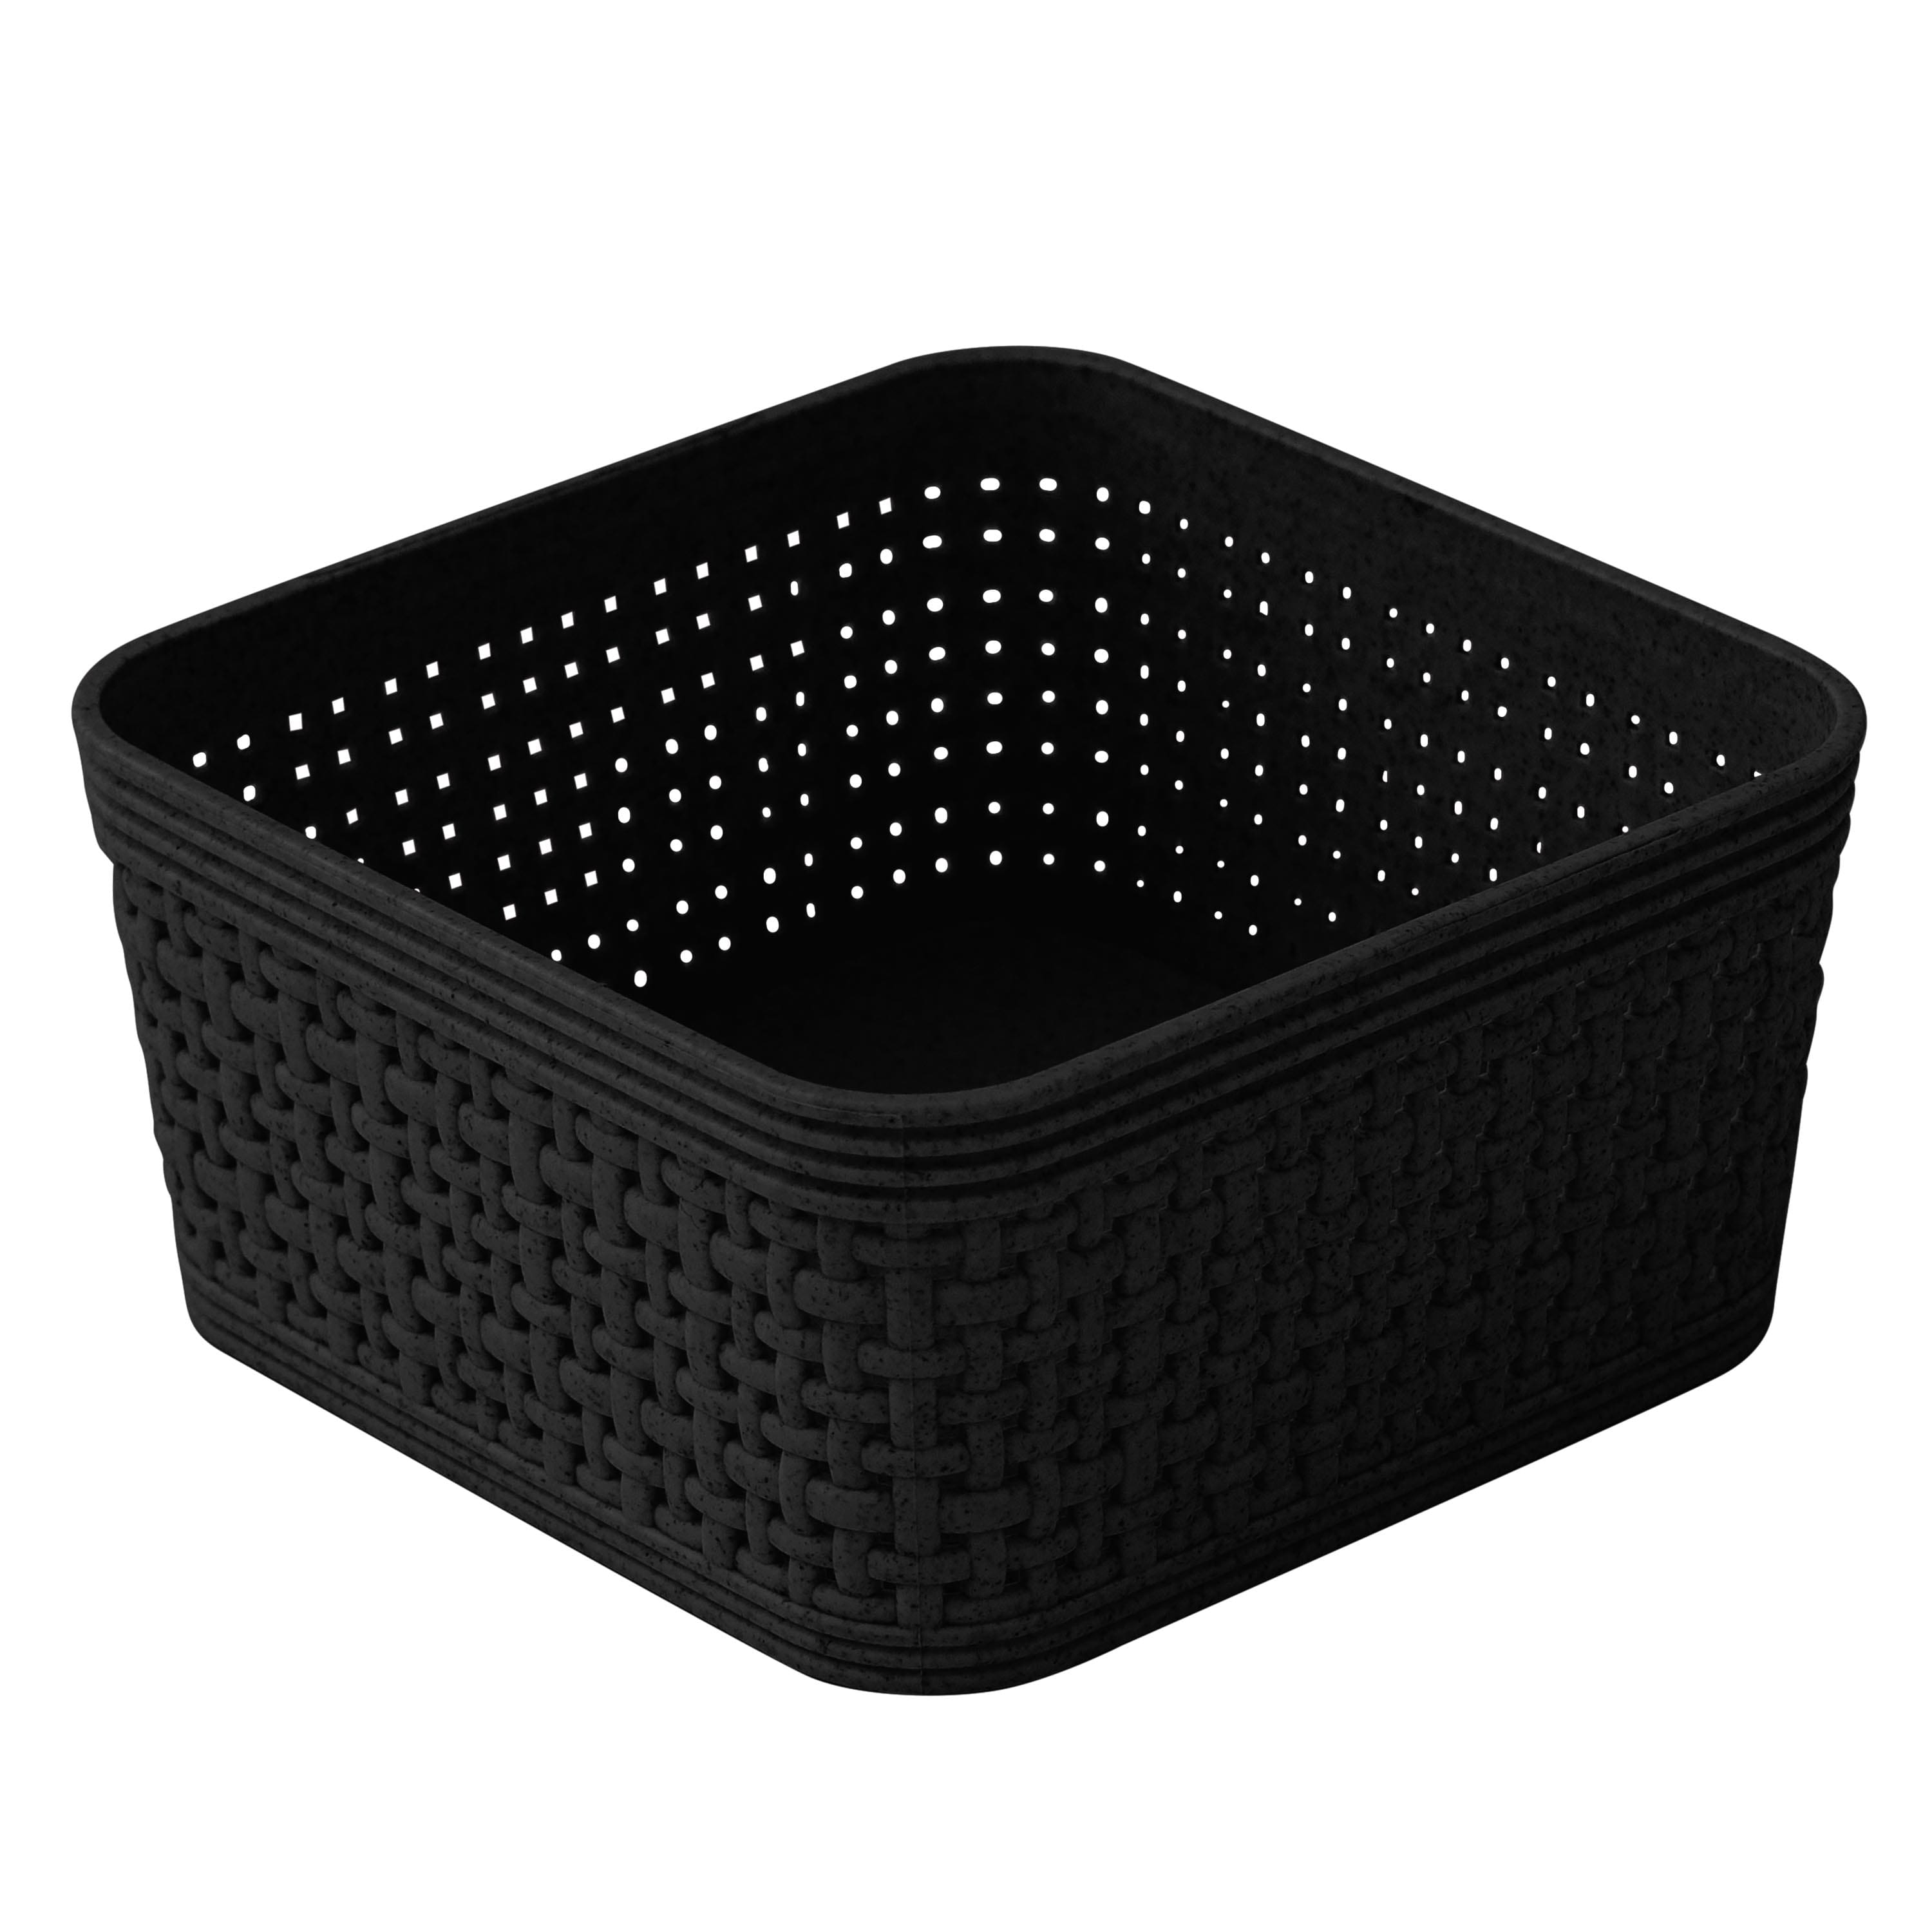 Simplify For Green Living Square Organizing Baskets, 6ct.